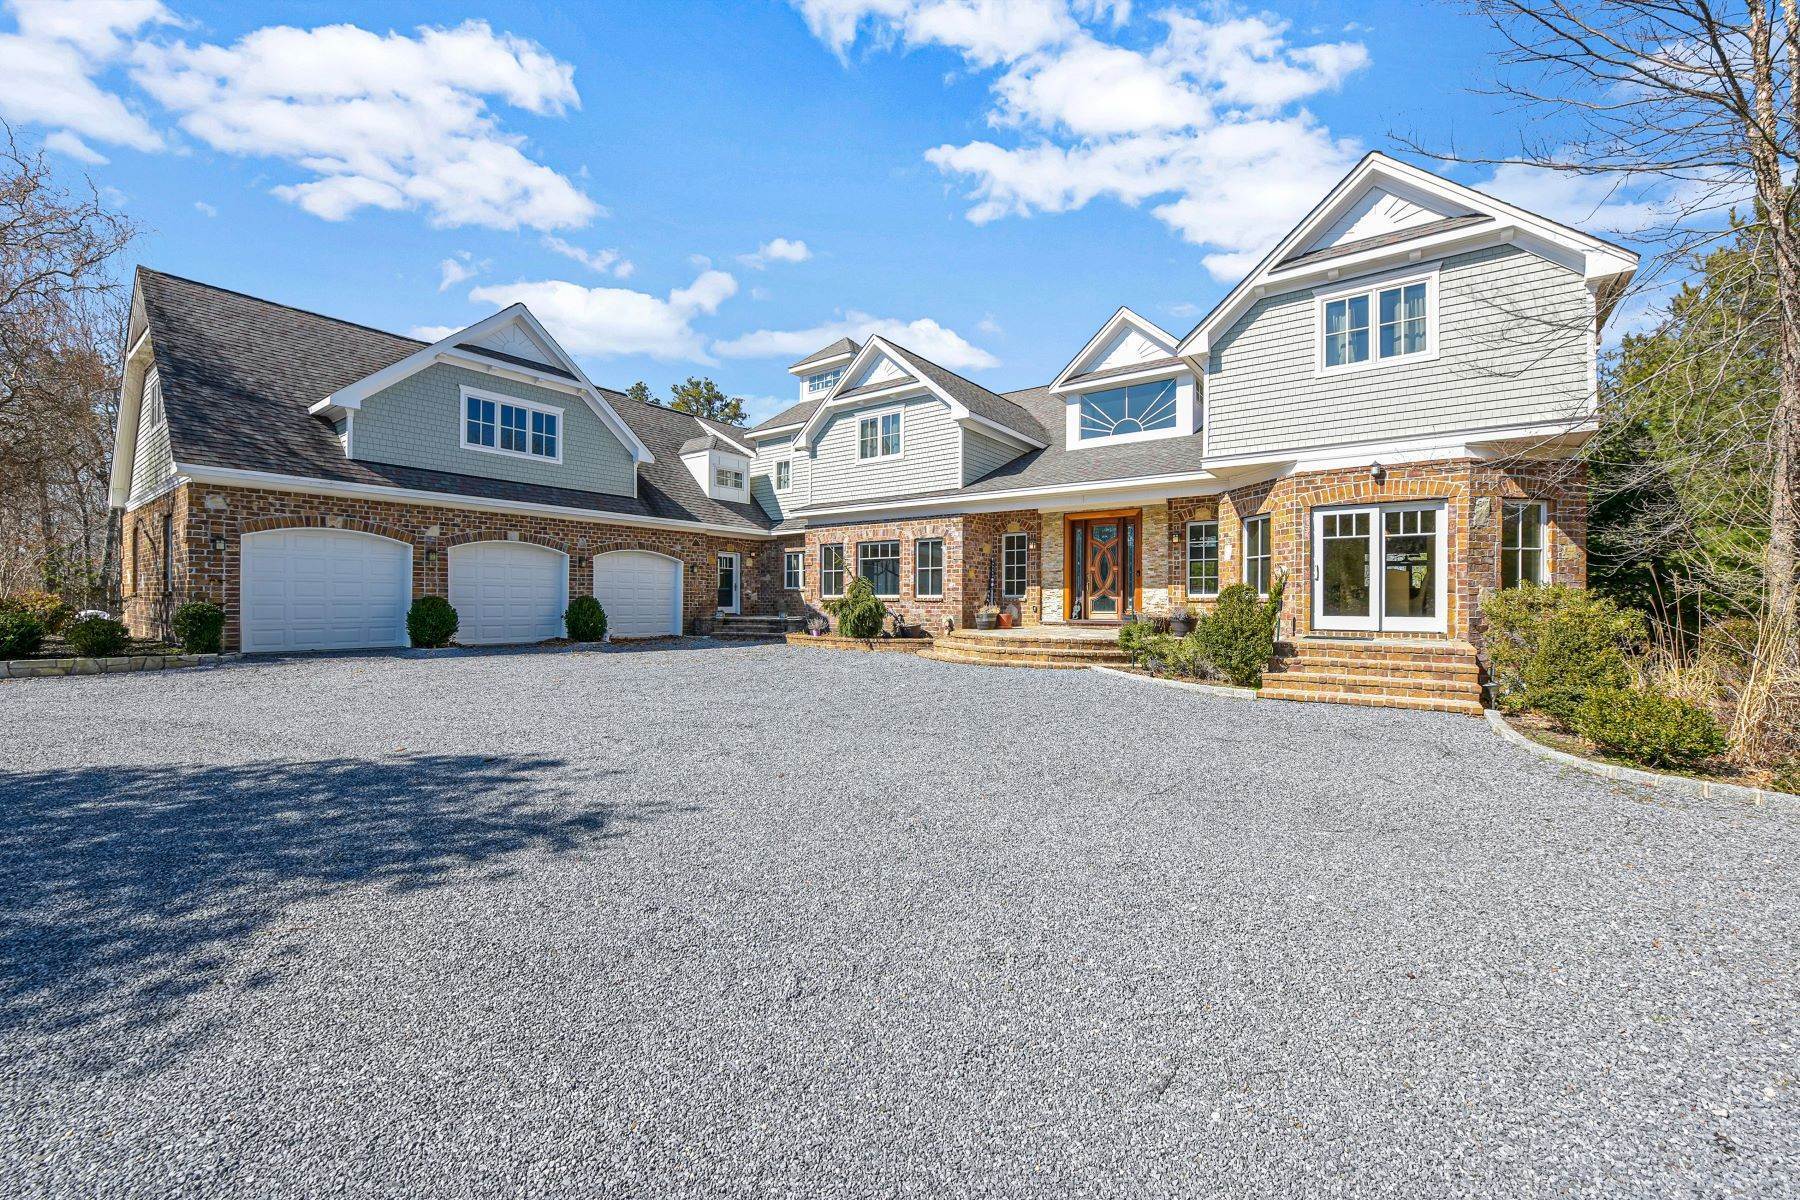 Single Family Homes for Sale at 14 Red Creek Circle, Hampton Bays, NY, 11946 14 Red Creek Circle Hampton Bays, New York 11946 United States